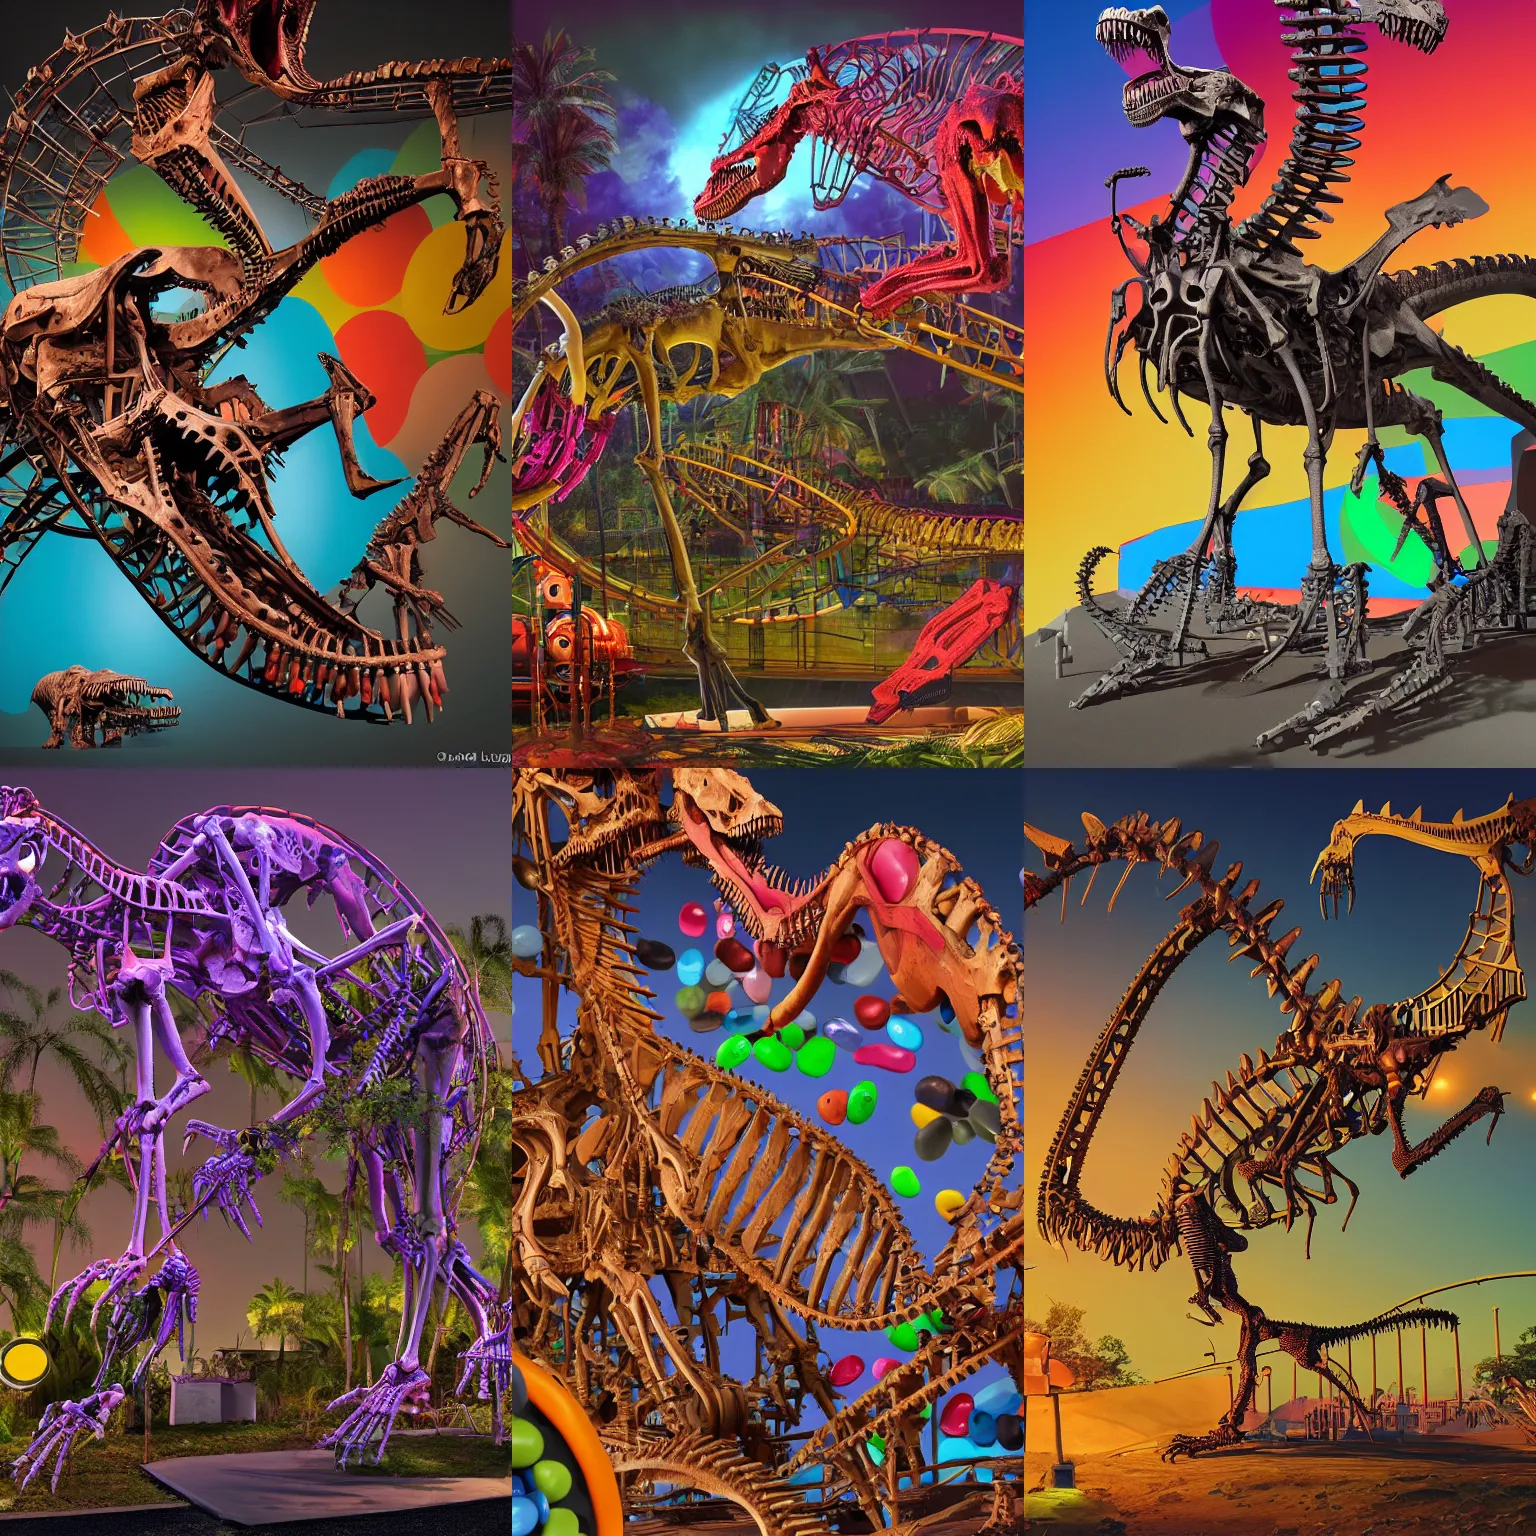 Prompt: Simple bionic exploded drawing dinosaur skeleton sculpture made from rollercoaster, with colorfull jellybeans organs, by david lachapelle, by angus mckie, by rhads, in a dark empty black studio hollow, c4d, at night, rimlight, rimight, rimlight